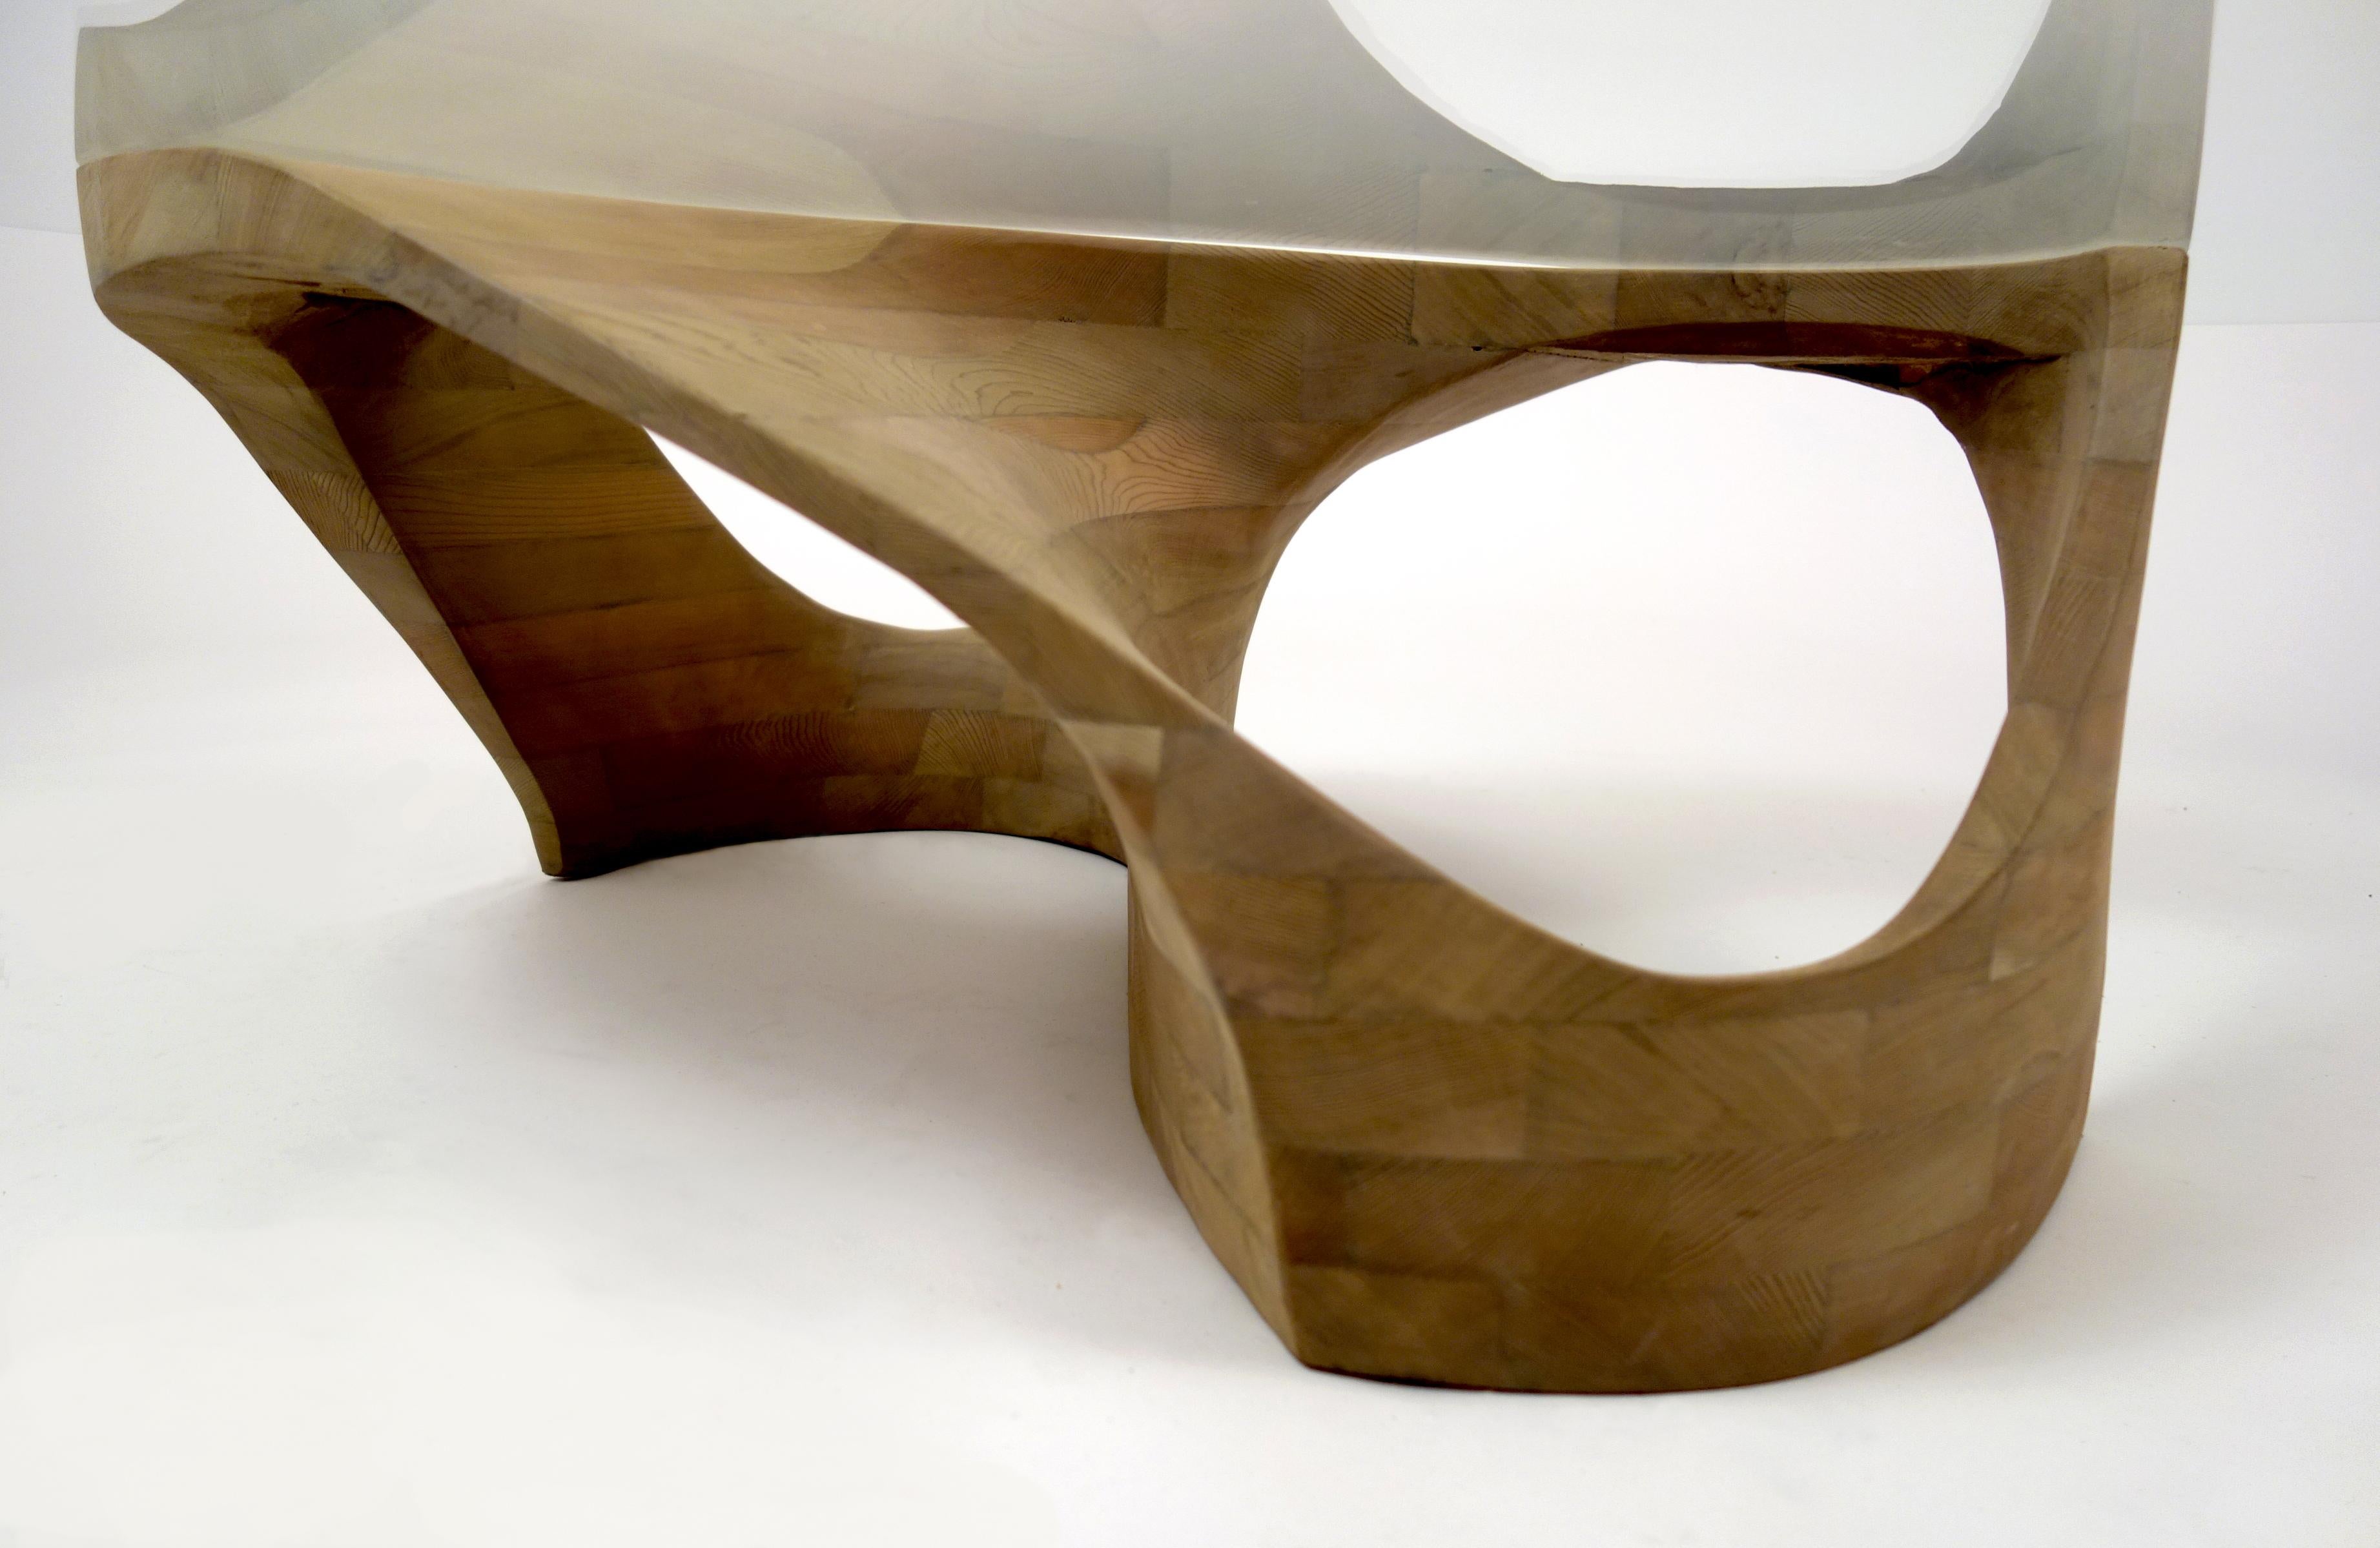 Carved Loch Coffee Table for Outdoor Use